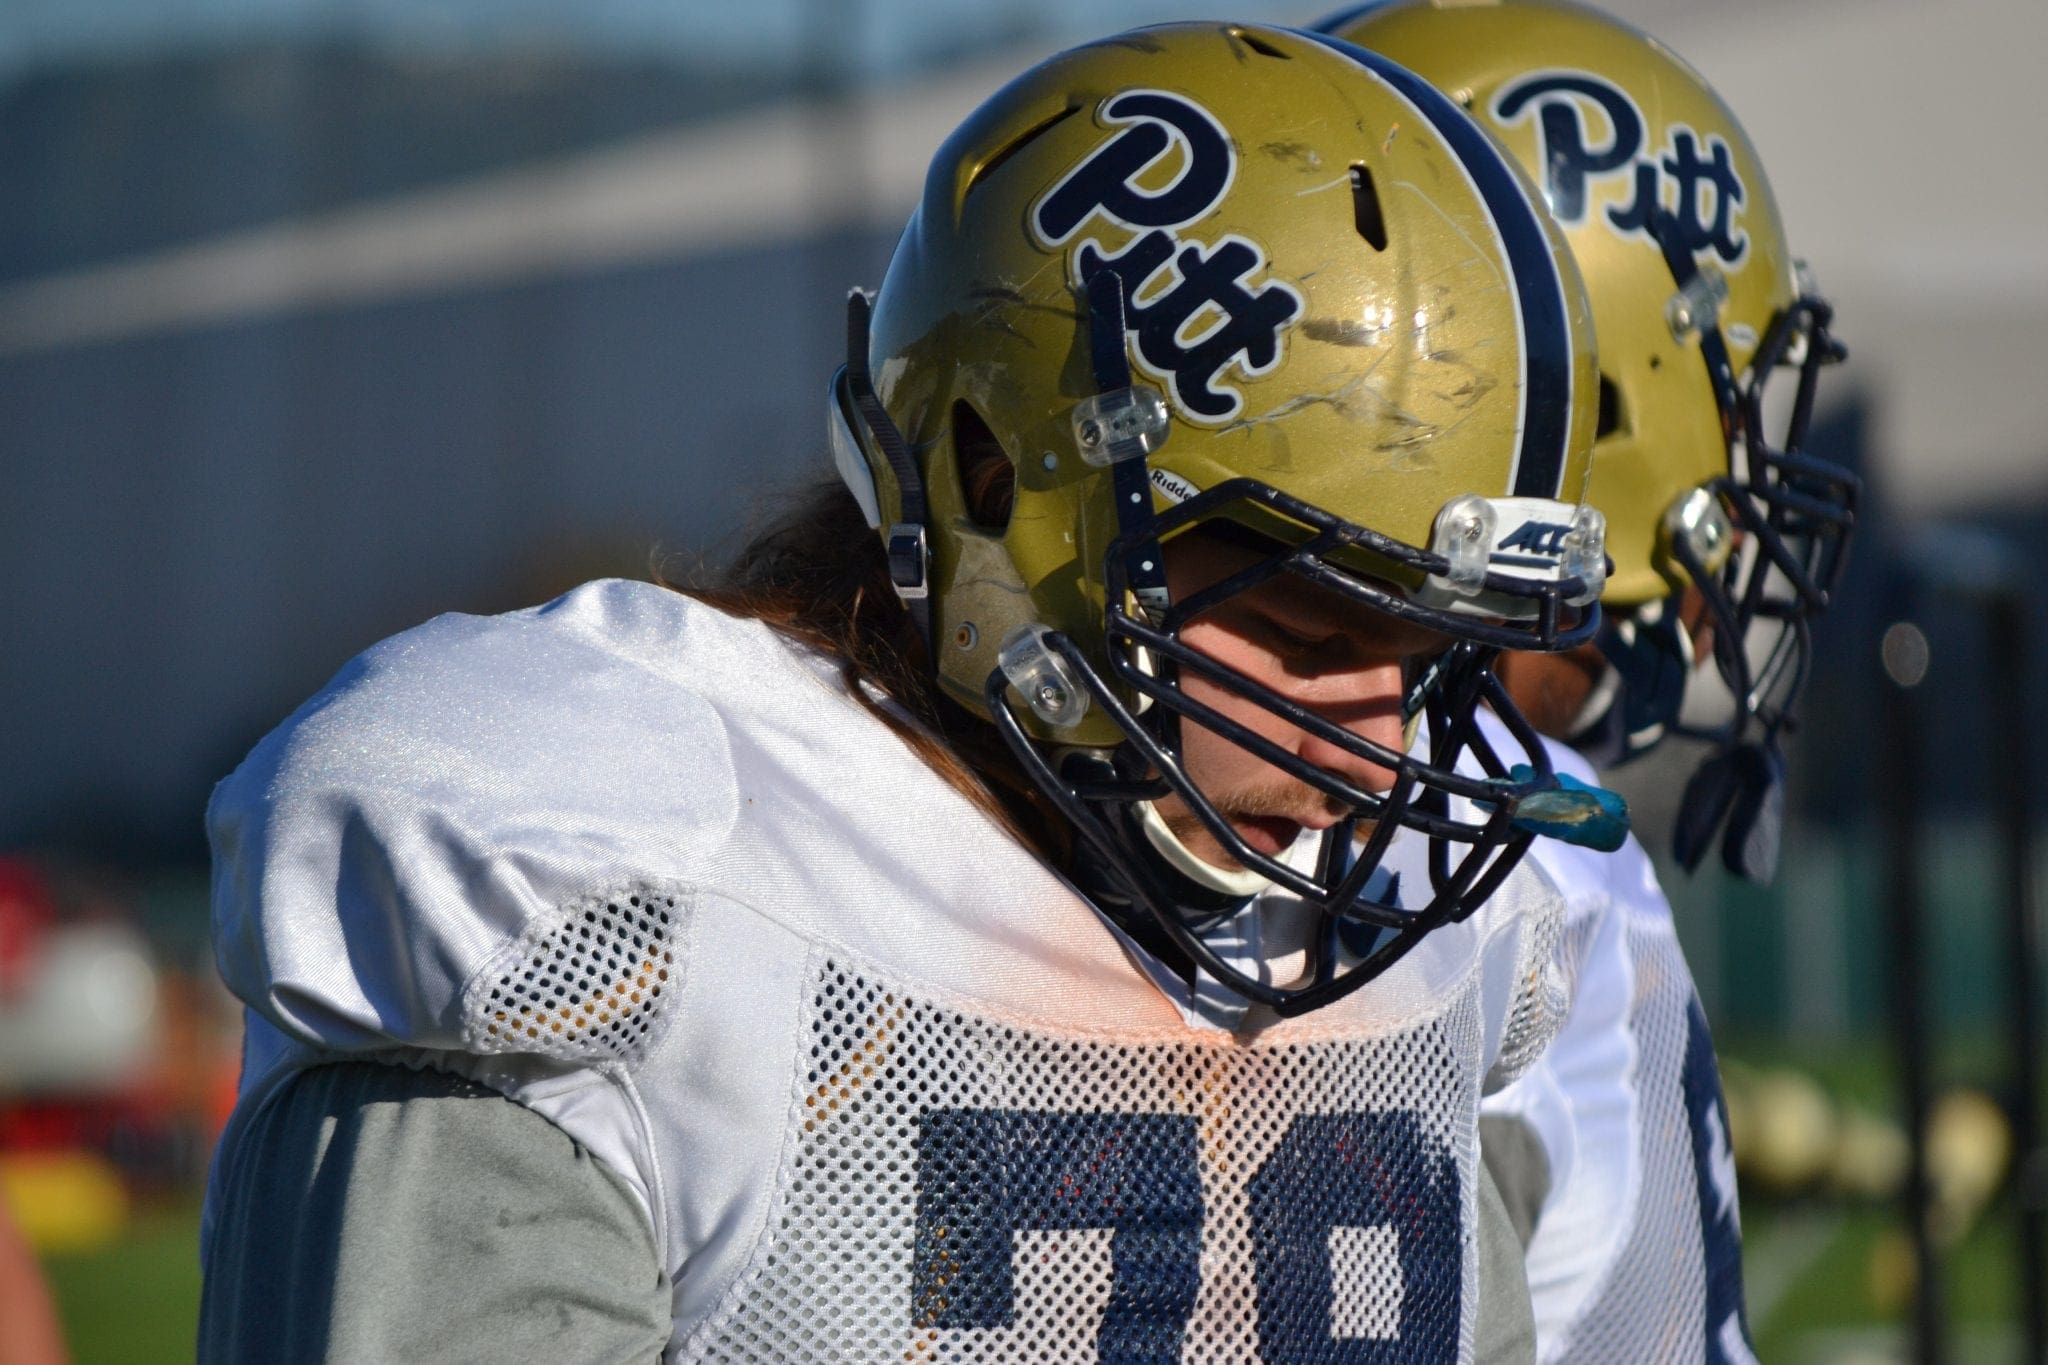 Alex Bookser Loves the Expectations for the 2018 Pitt Panthers | Pittsburgh Sports Now2048 x 1365